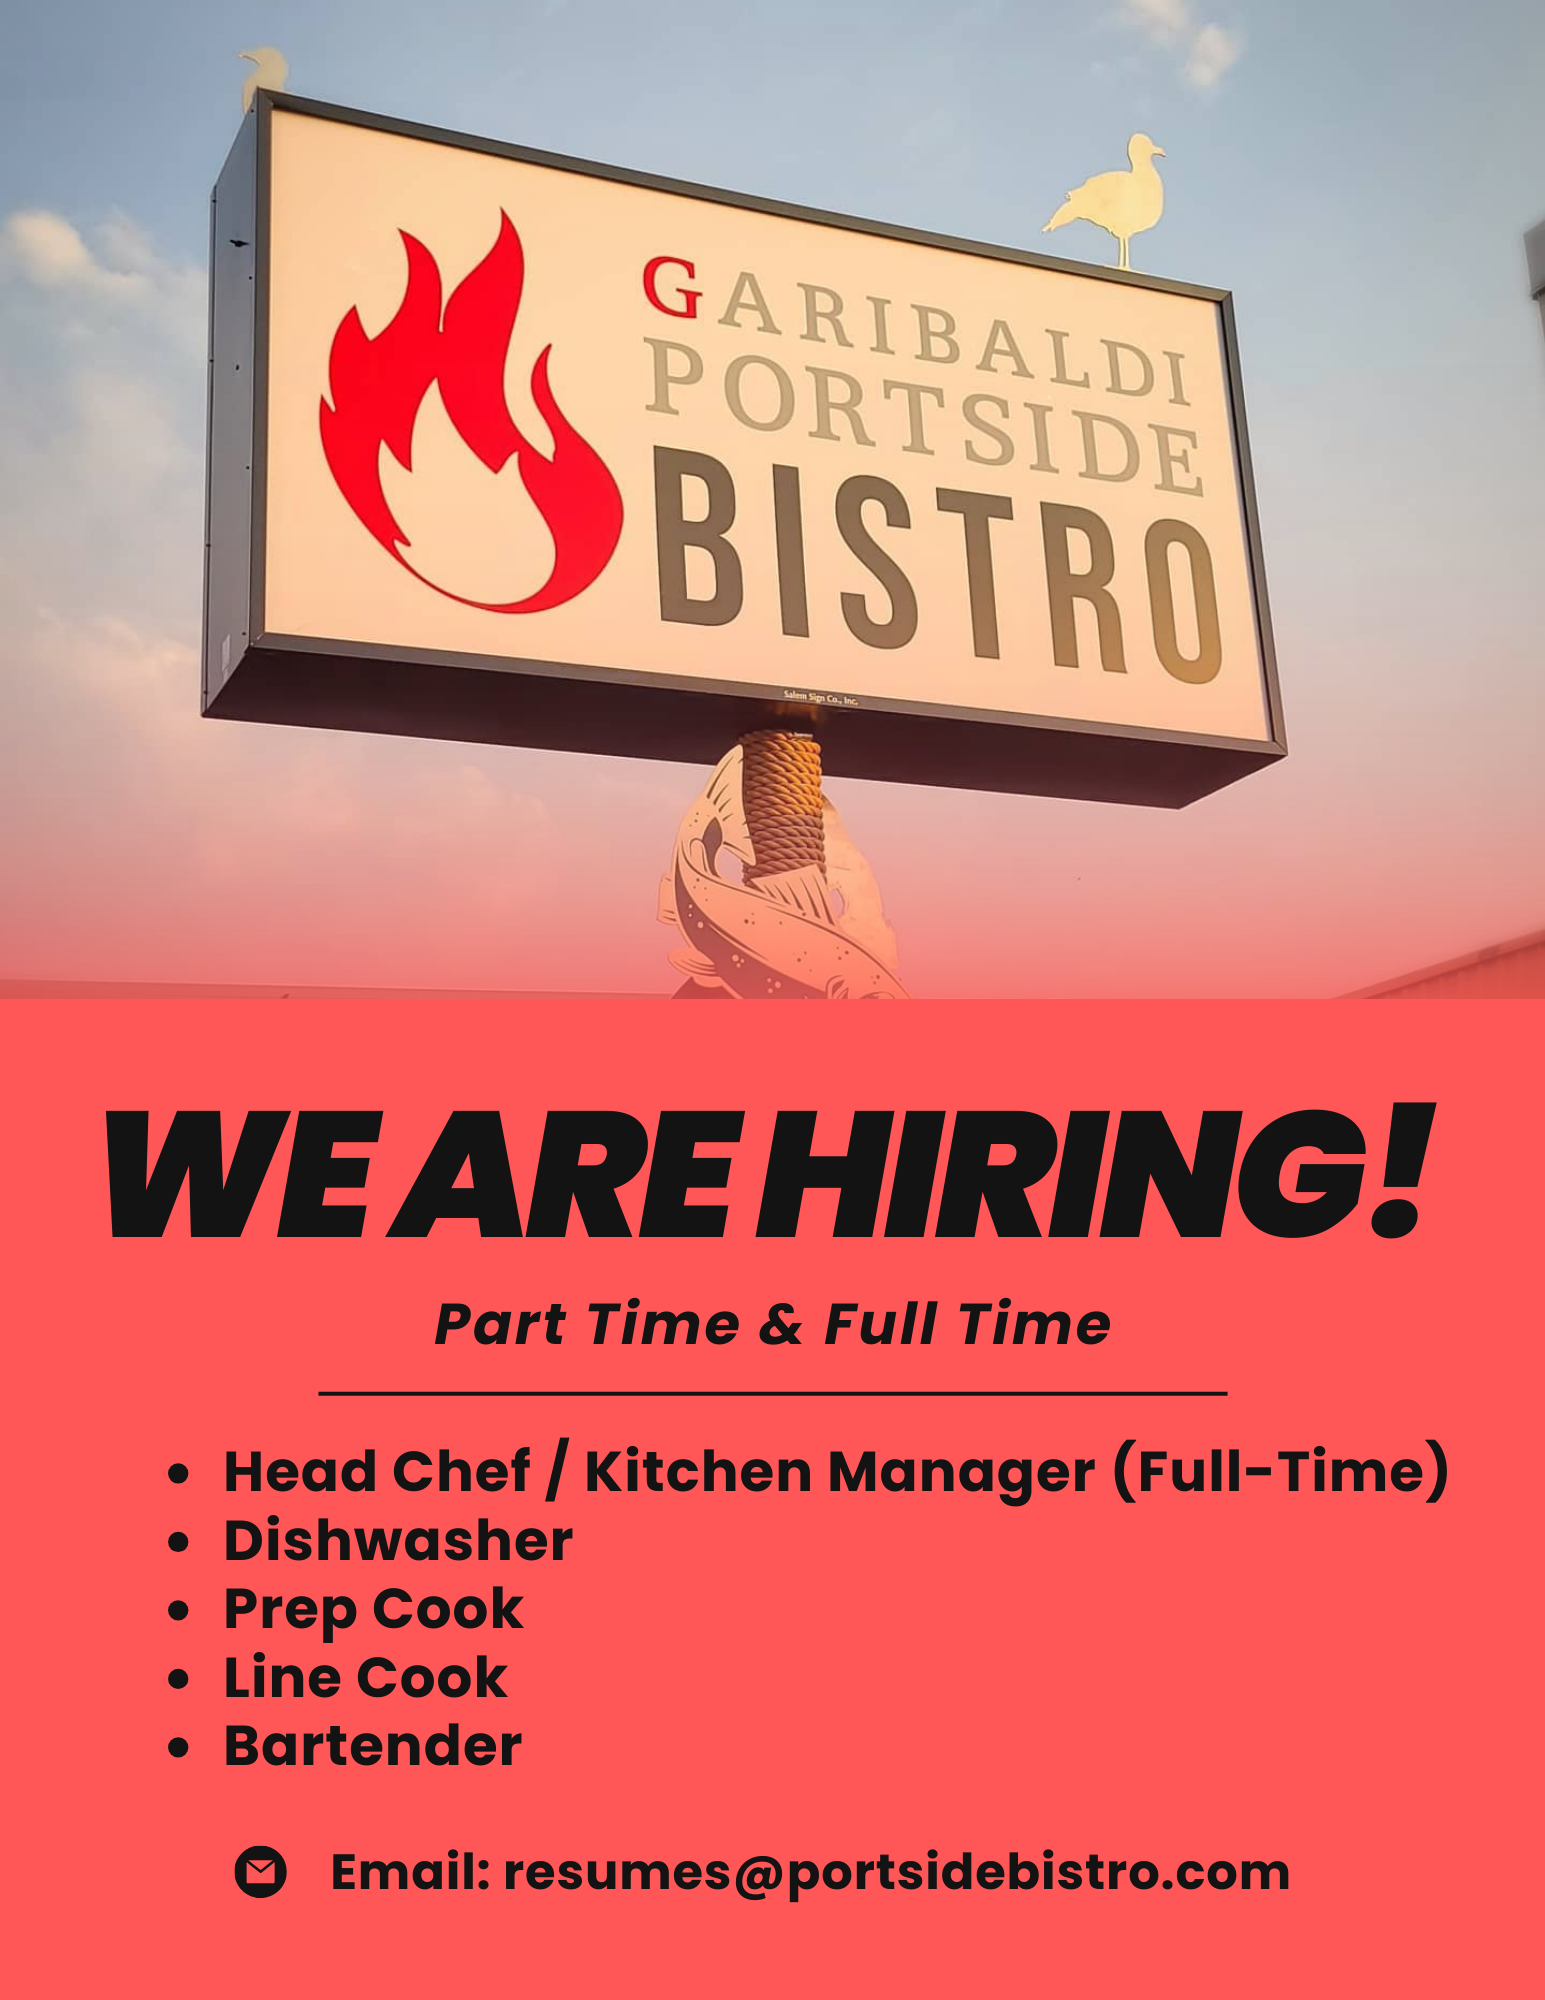 We are hiring: Full and Part Time Positions